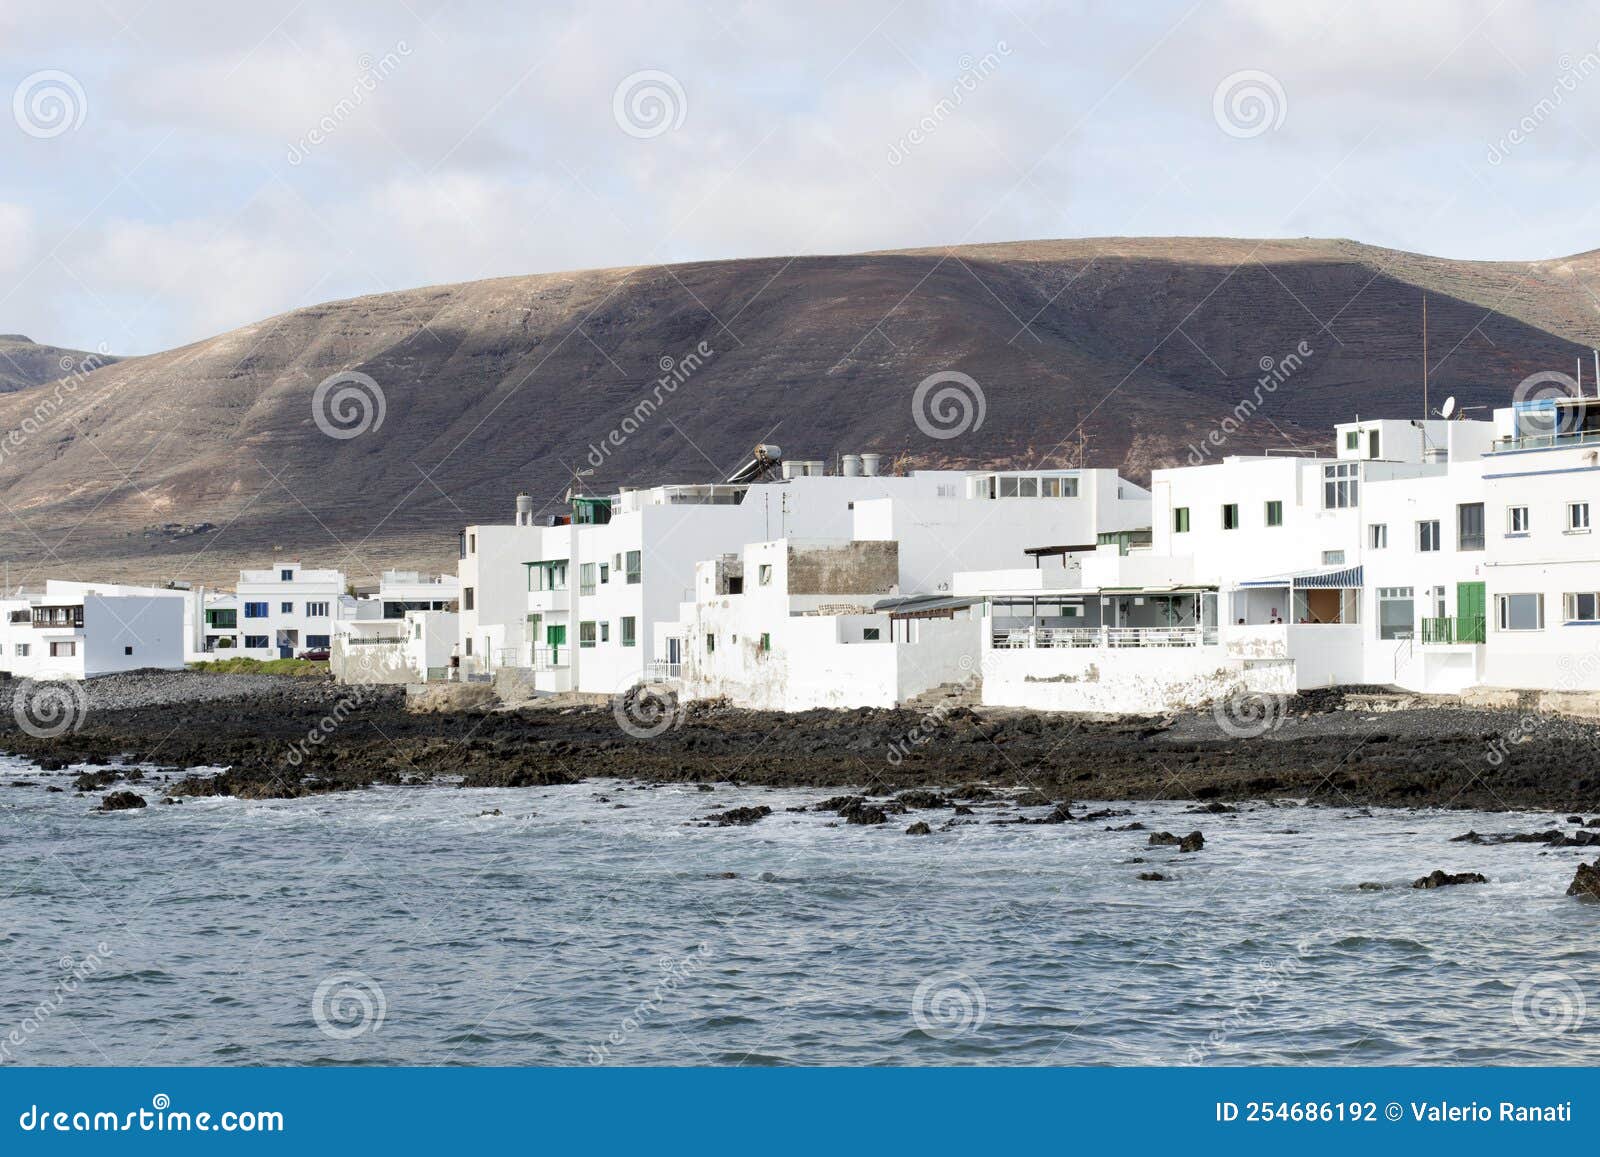 view of arrieta, a small town in lanzarote, canary islands, spain